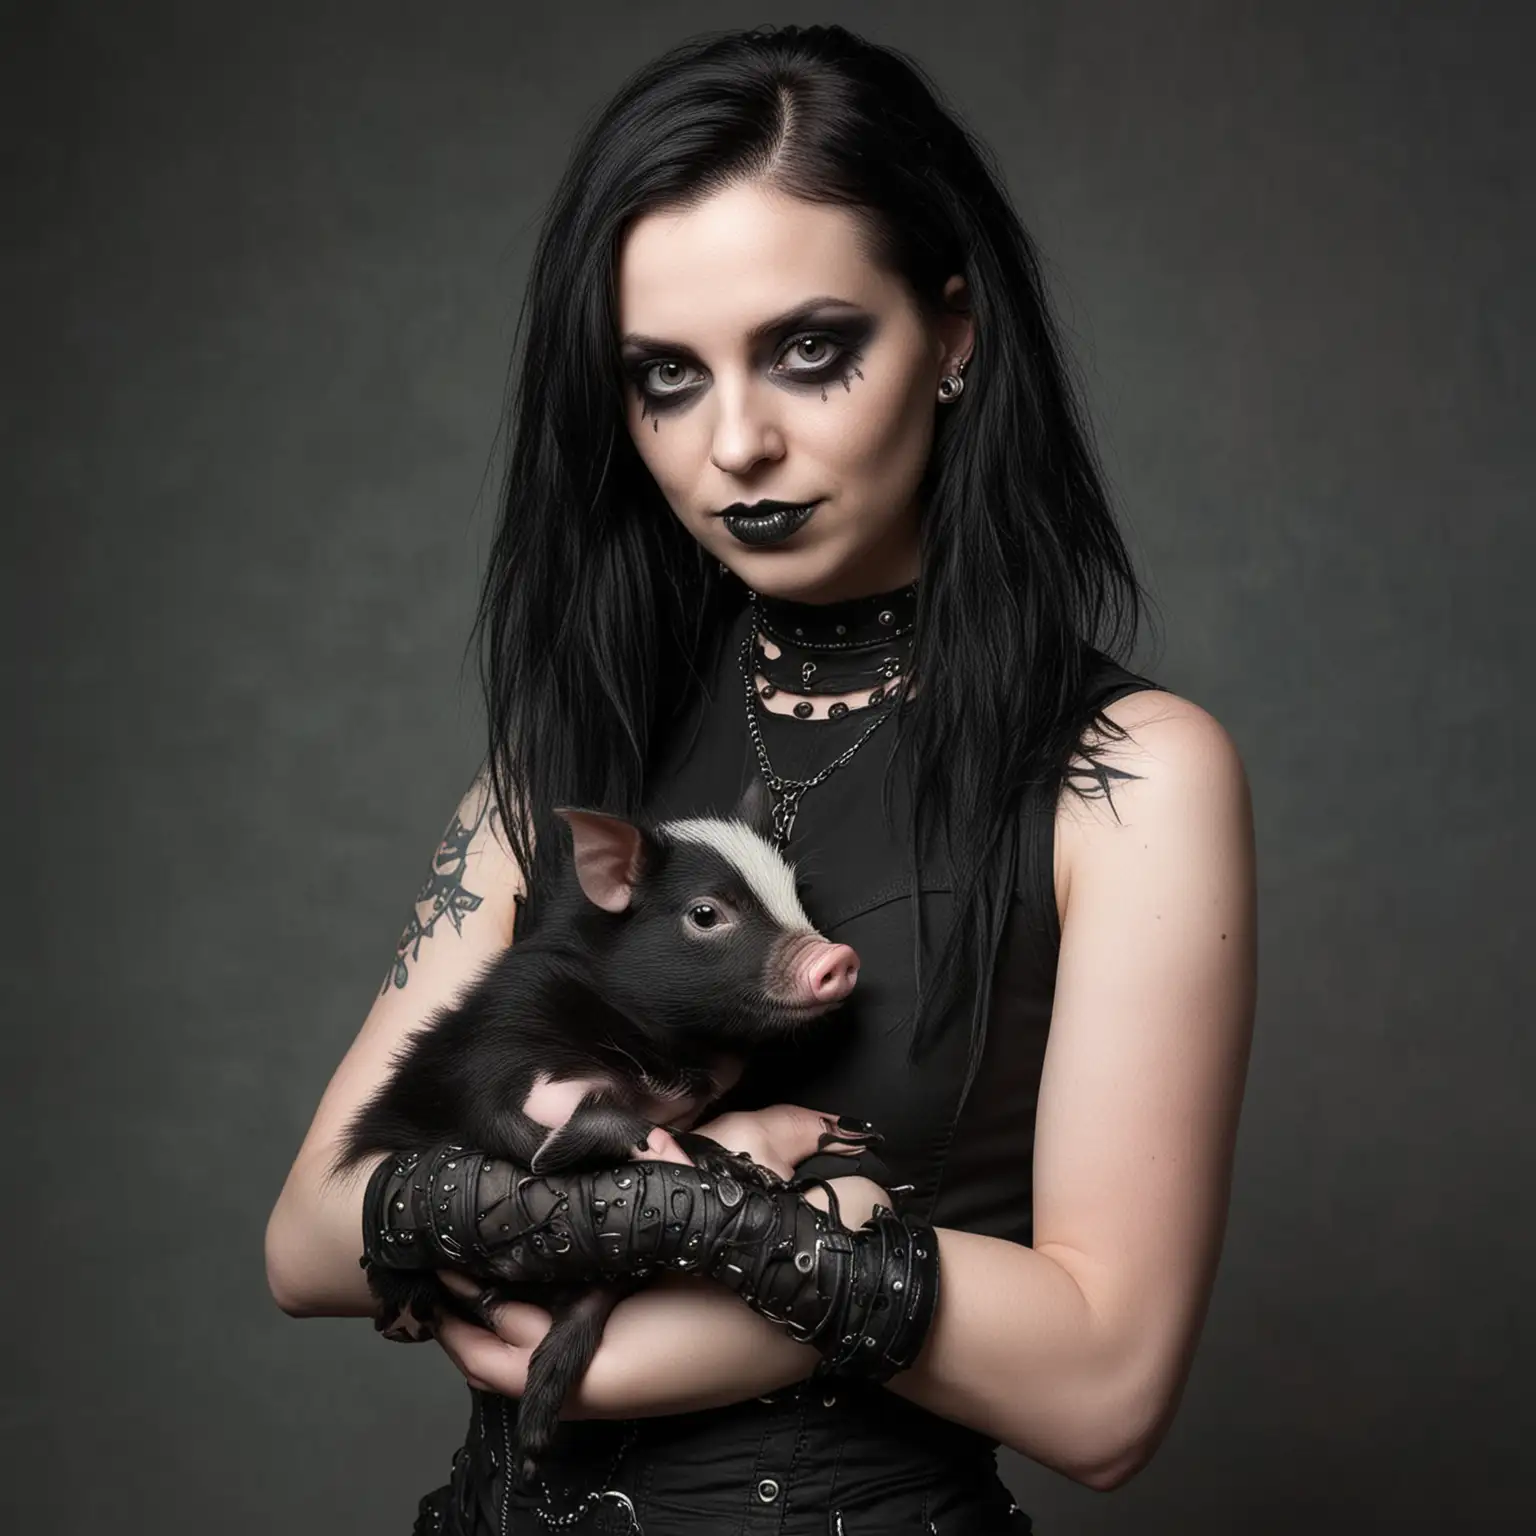 goth chick holding a baby pig